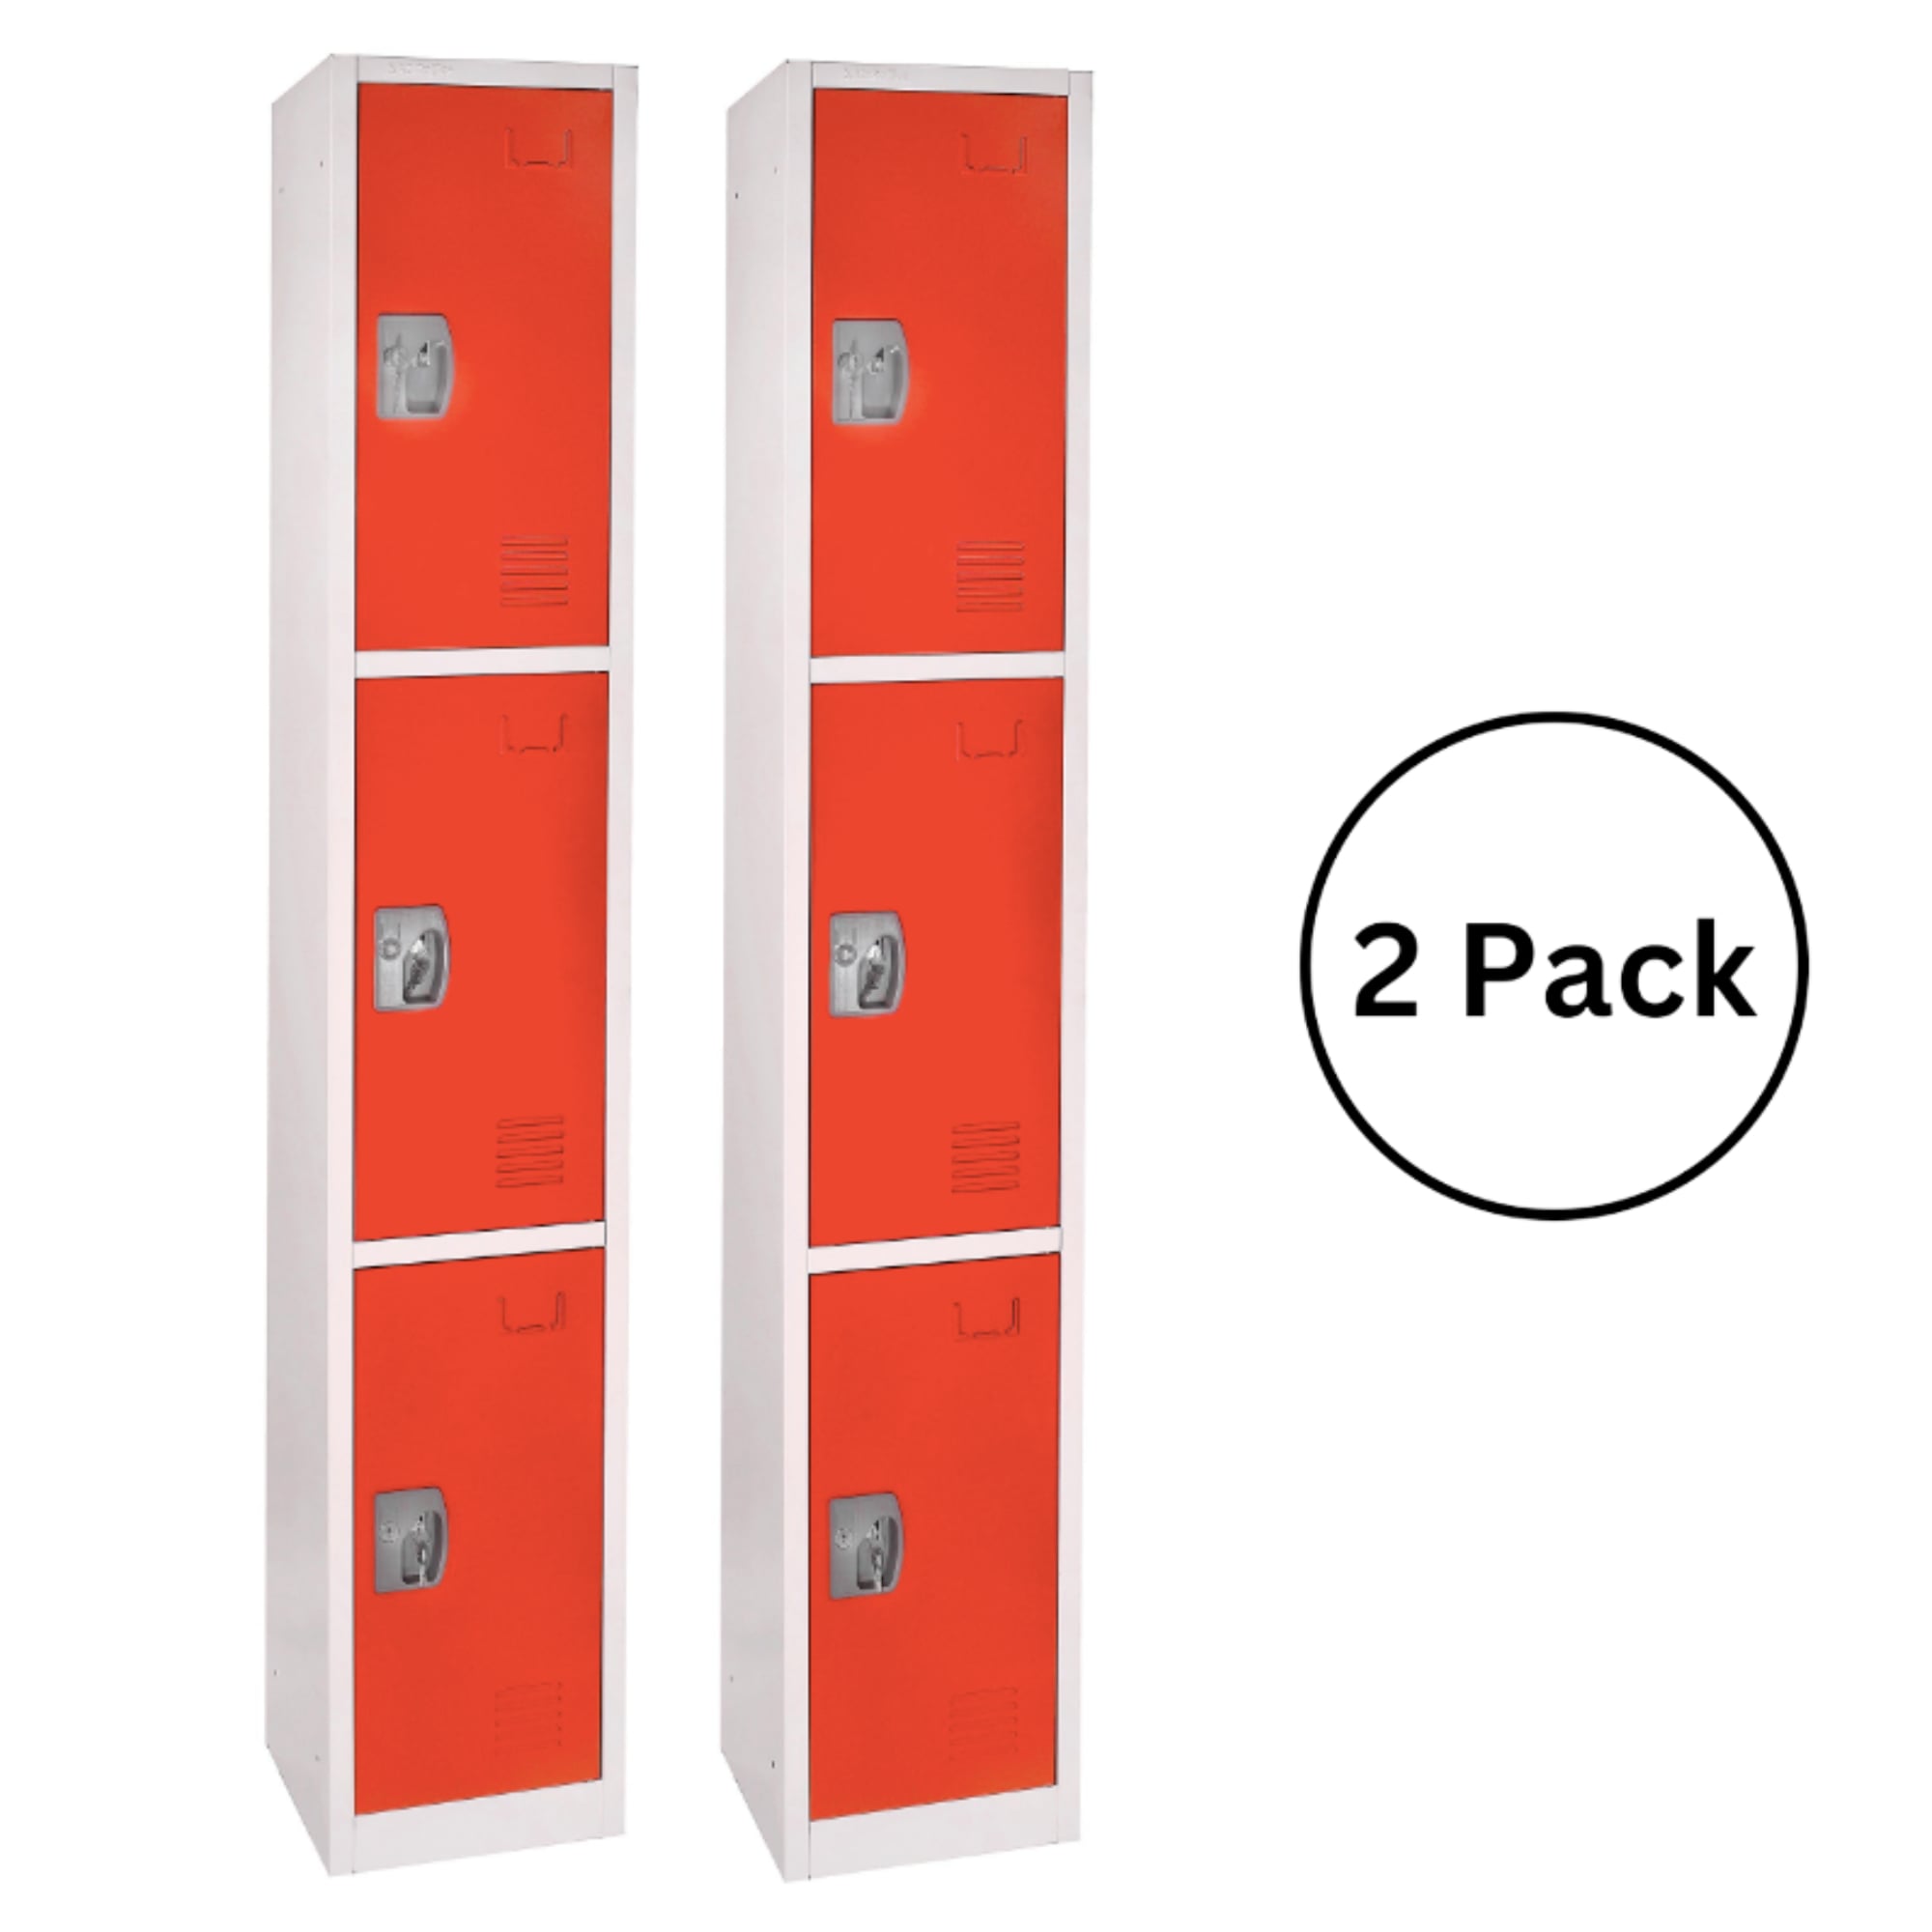 Rough Enough Locker Organizer for Work Door Wall Hanging Storage Organizer  with Pockets for Office Gym Home Accessories, Clear